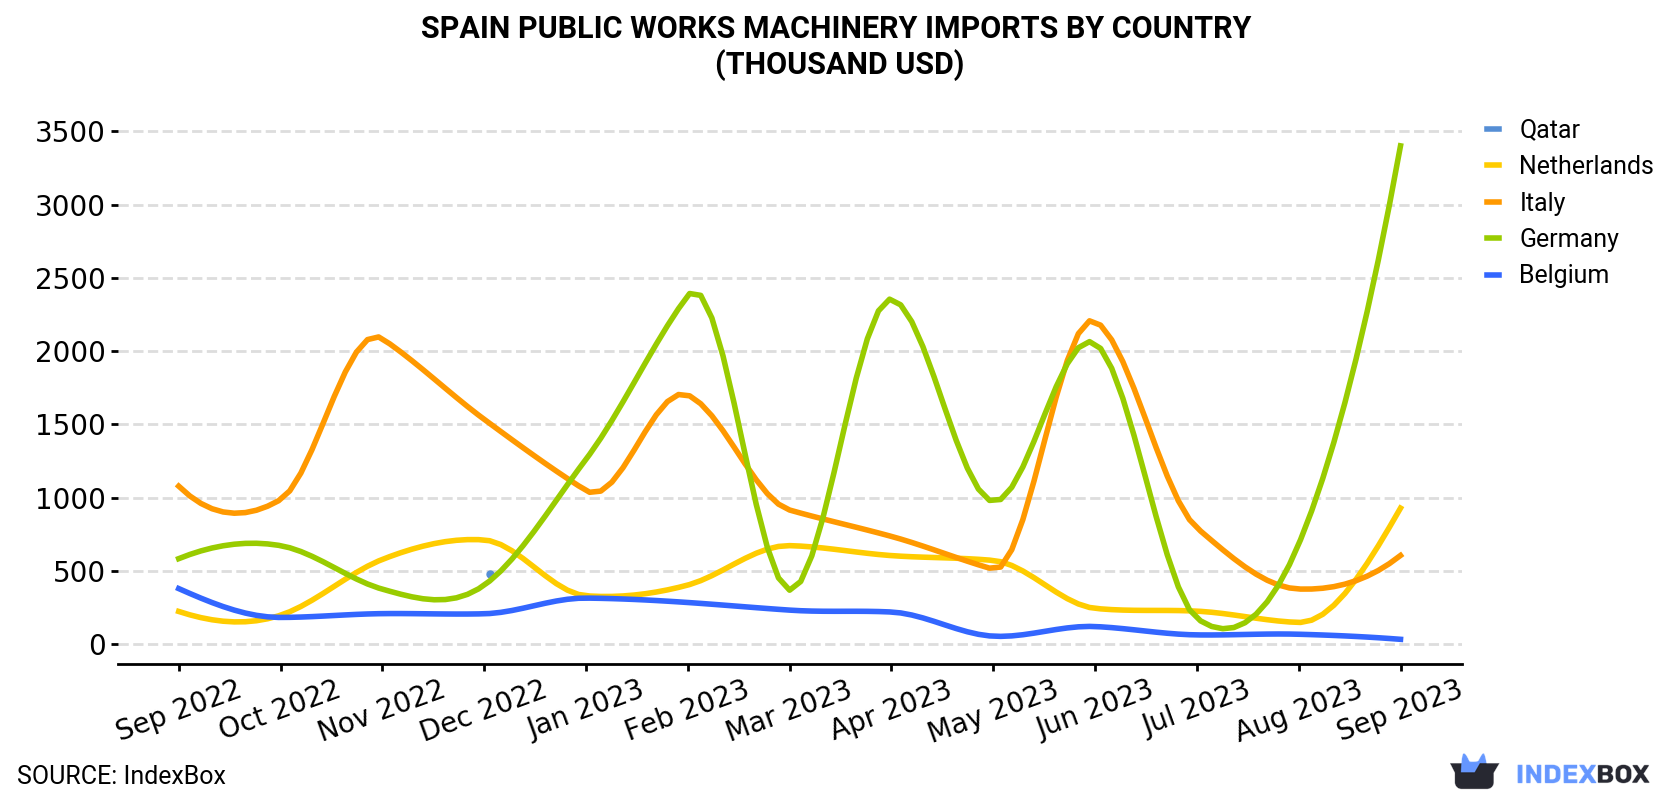 Spain Public Works Machinery Imports By Country (Thousand USD)